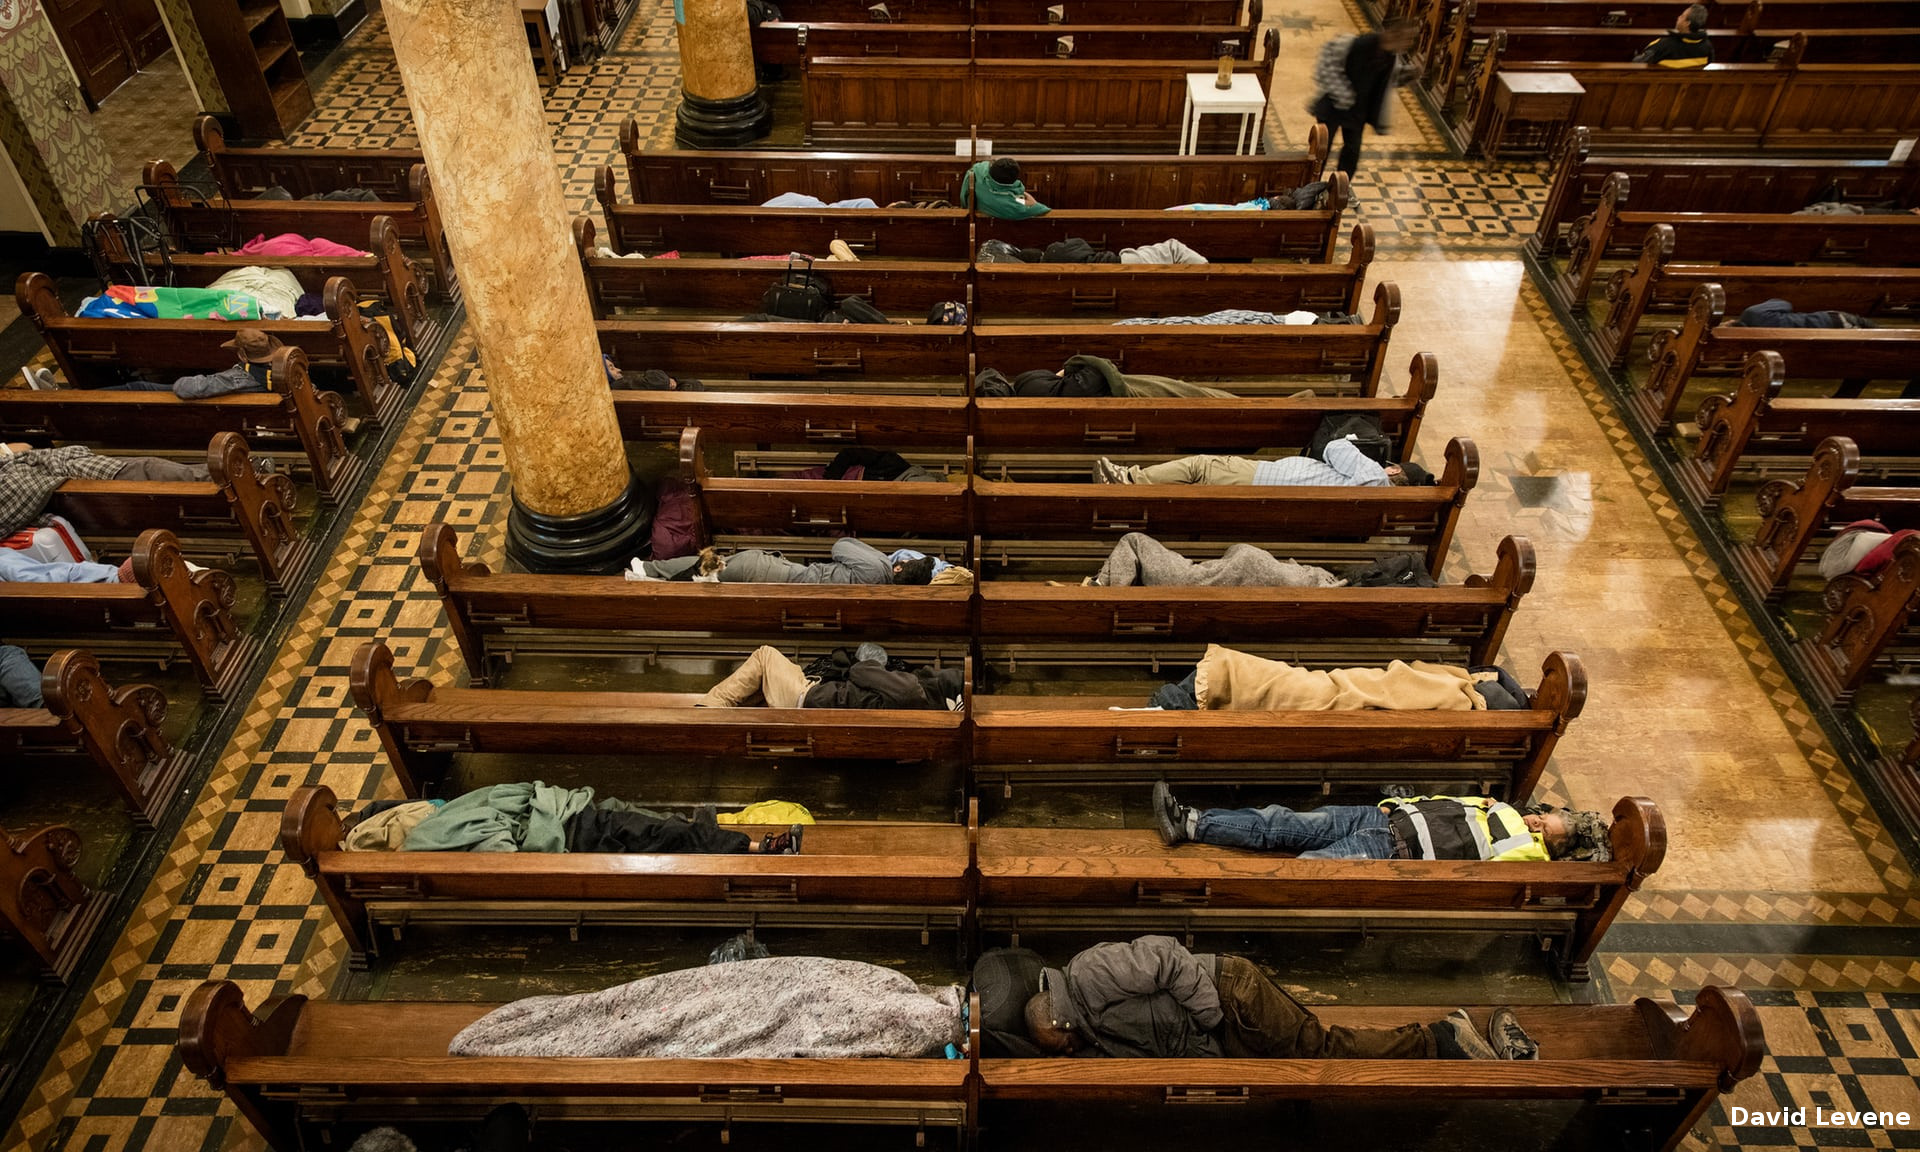 The+homeless+sleeping+on+pews+in+a+San+Francisco+church